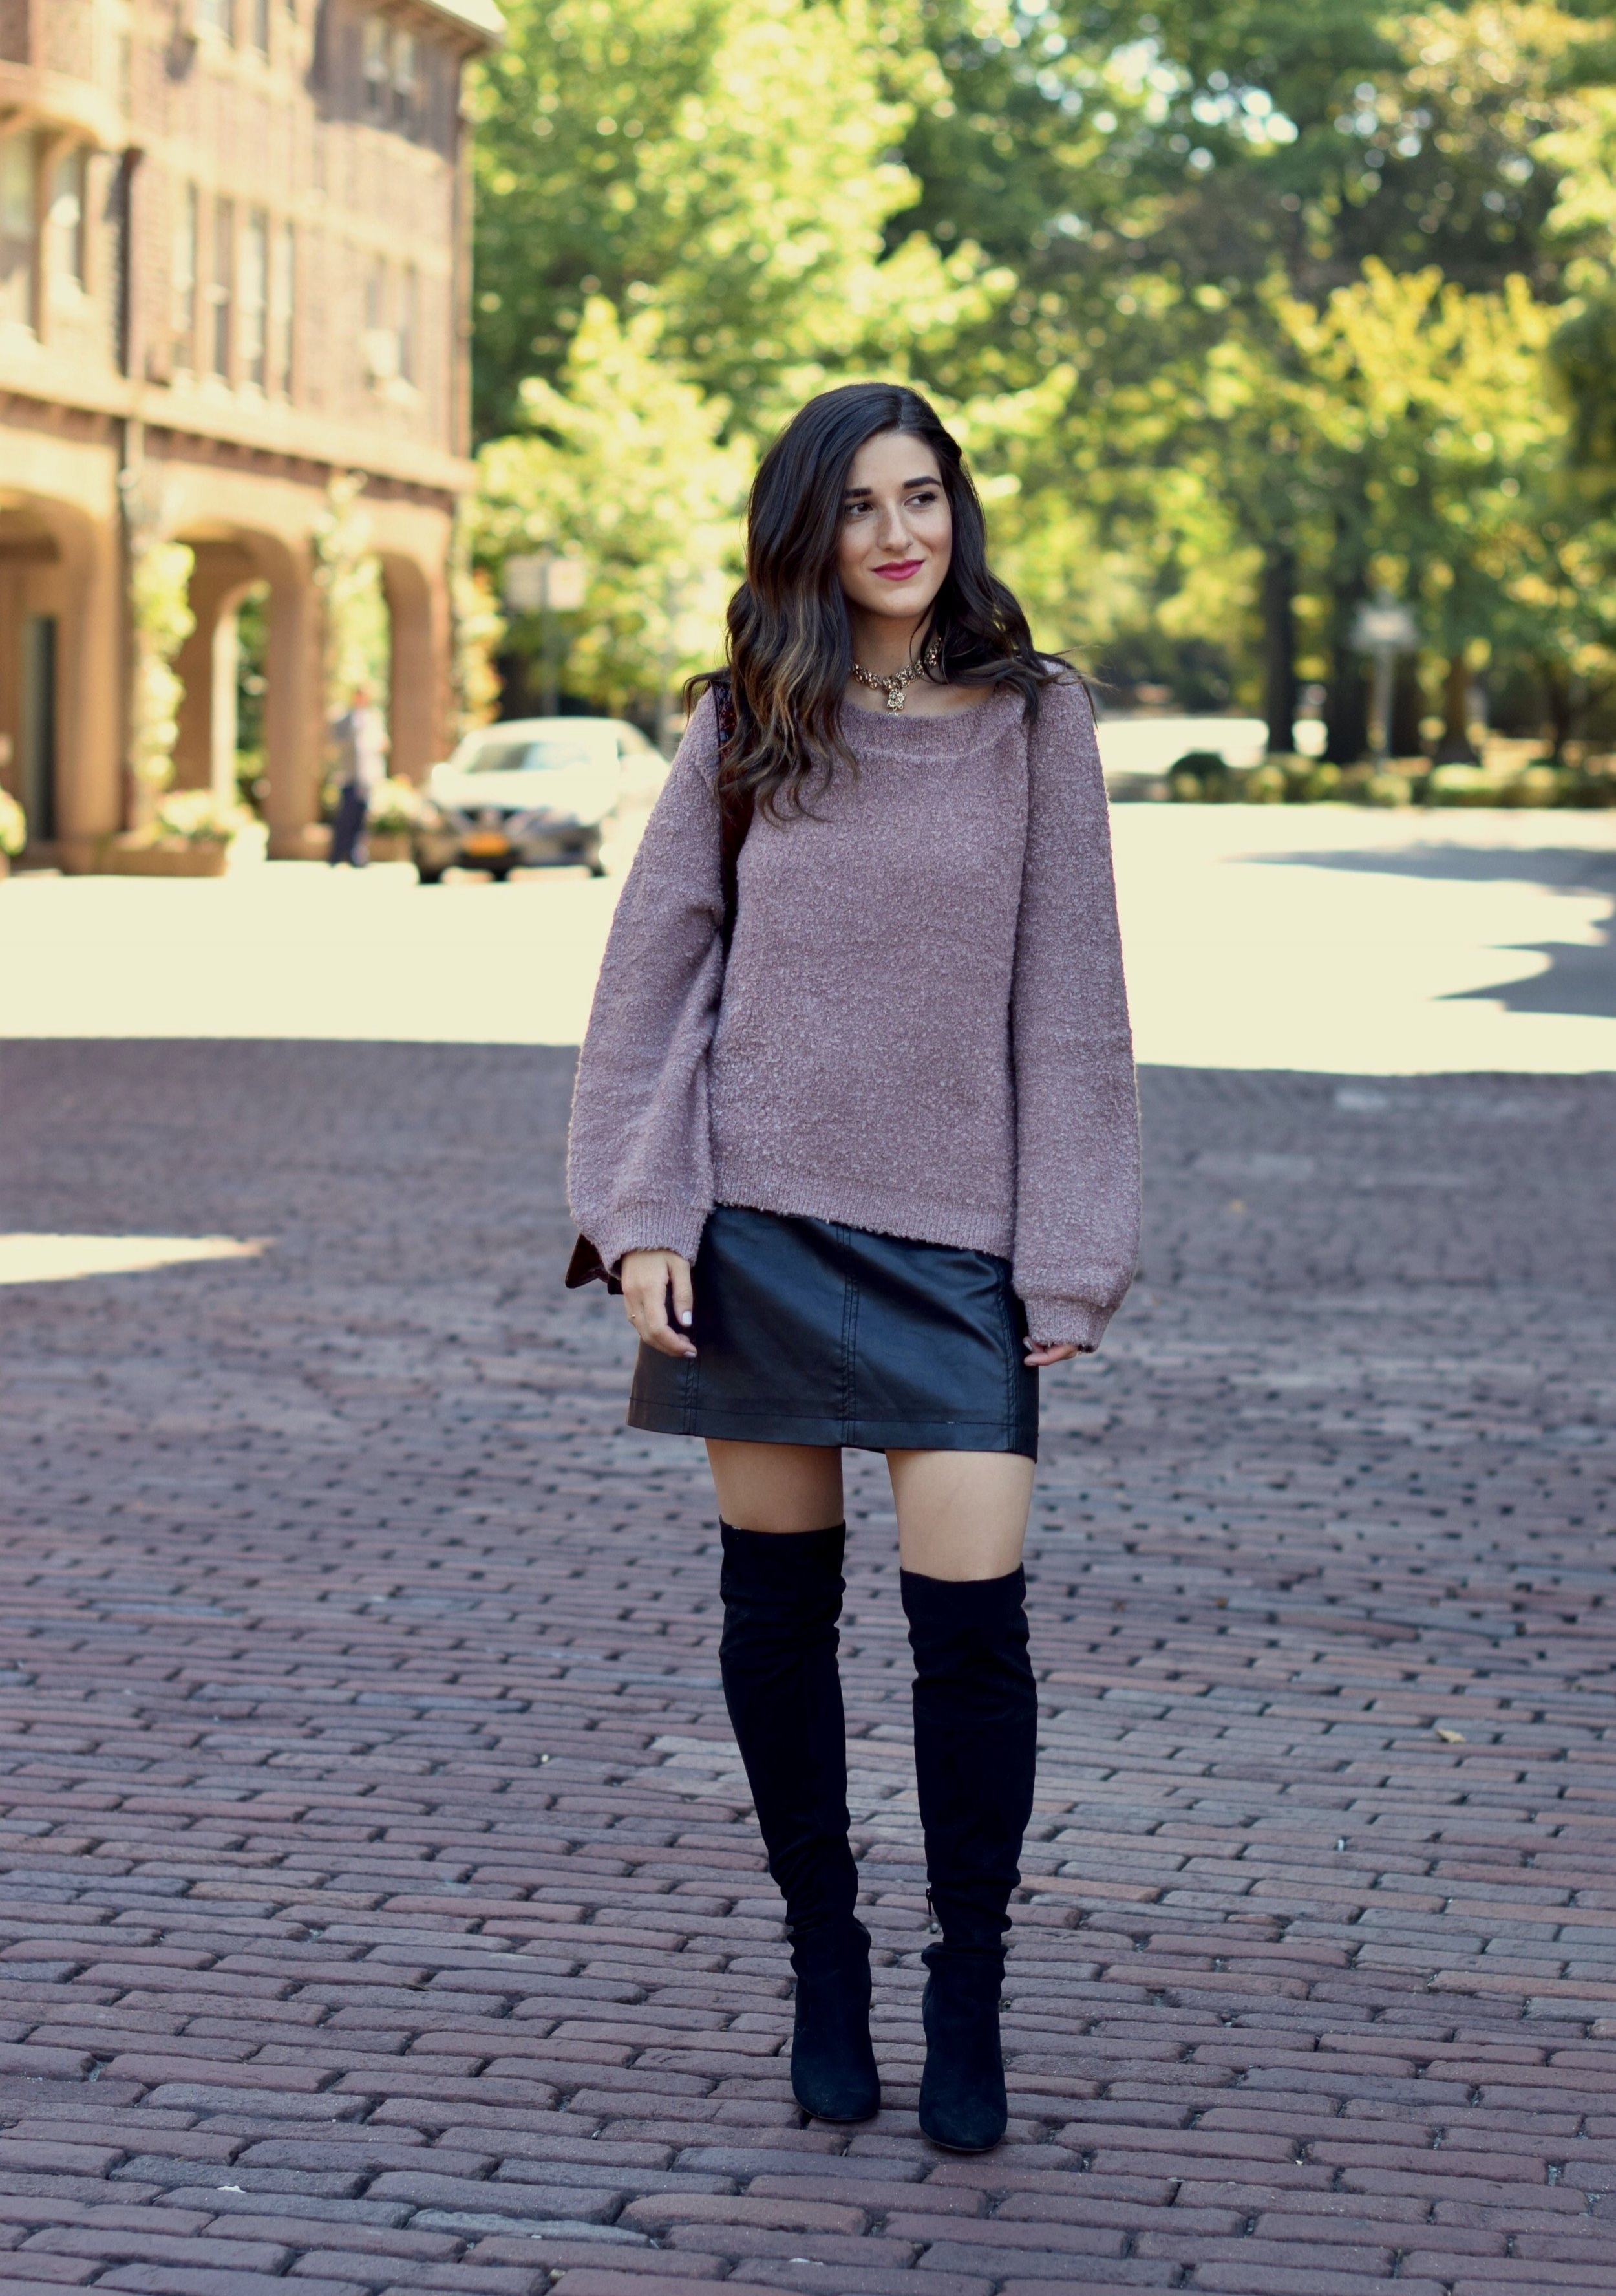 Purple Sweater Black Leather Skirt 8 Tips On Switching Your Blog Name Esther Santer Fashion Blog NYC Street Style Blogger Outfit OOTD Trendy Sunglasses Brahmin Bag Kendra Scott Choker Necklace Girl Women Urban Outfitters  Winter Look Sale Shopping.jpg